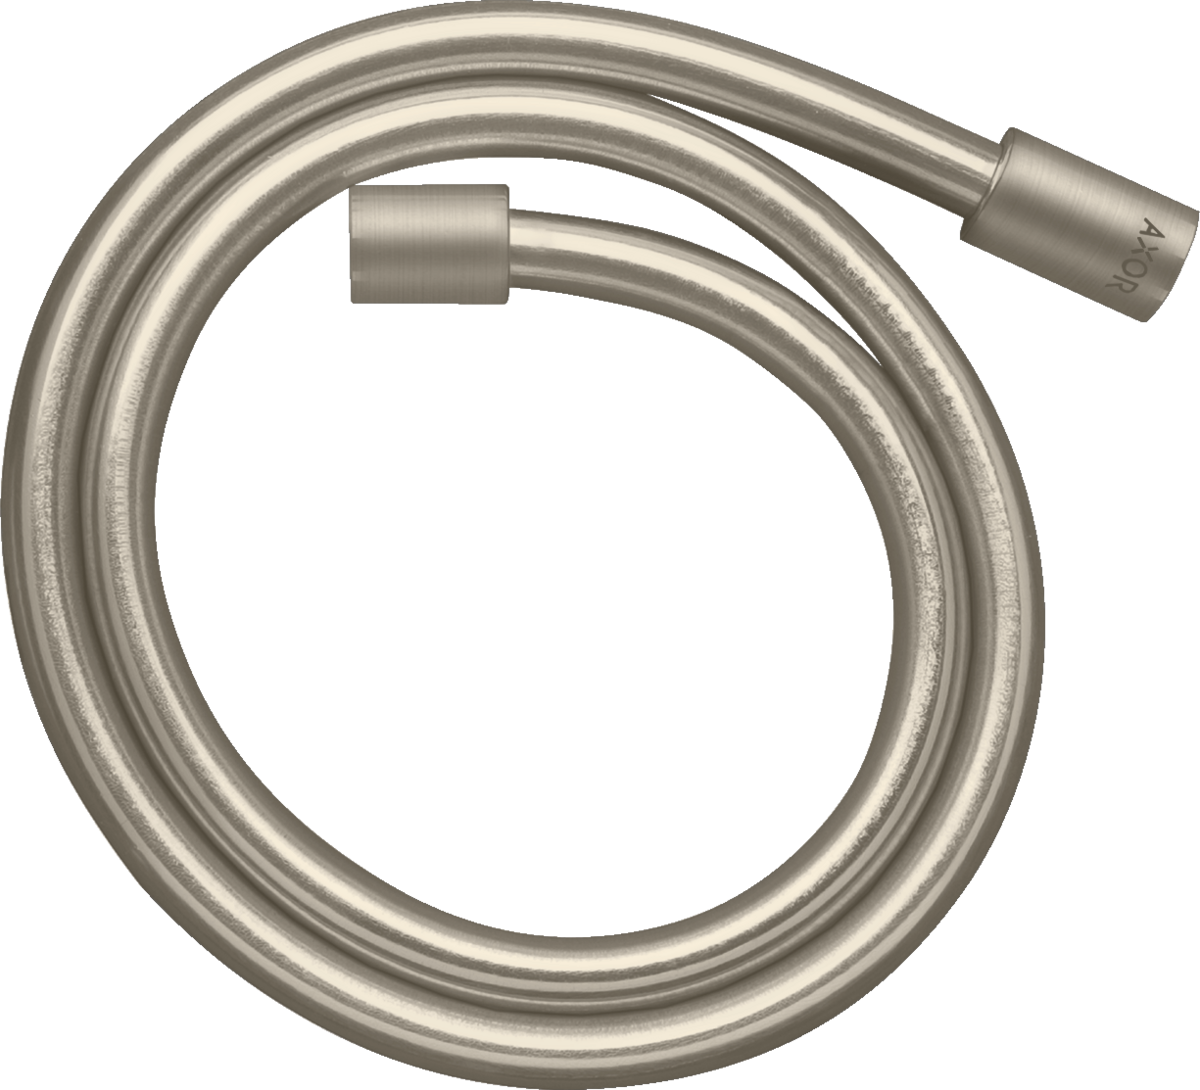 Picture of HANSGROHE AXOR Starck Metal effect shower hose 1.25 m with cylindrical nuts #28282820 - Brushed Nickel